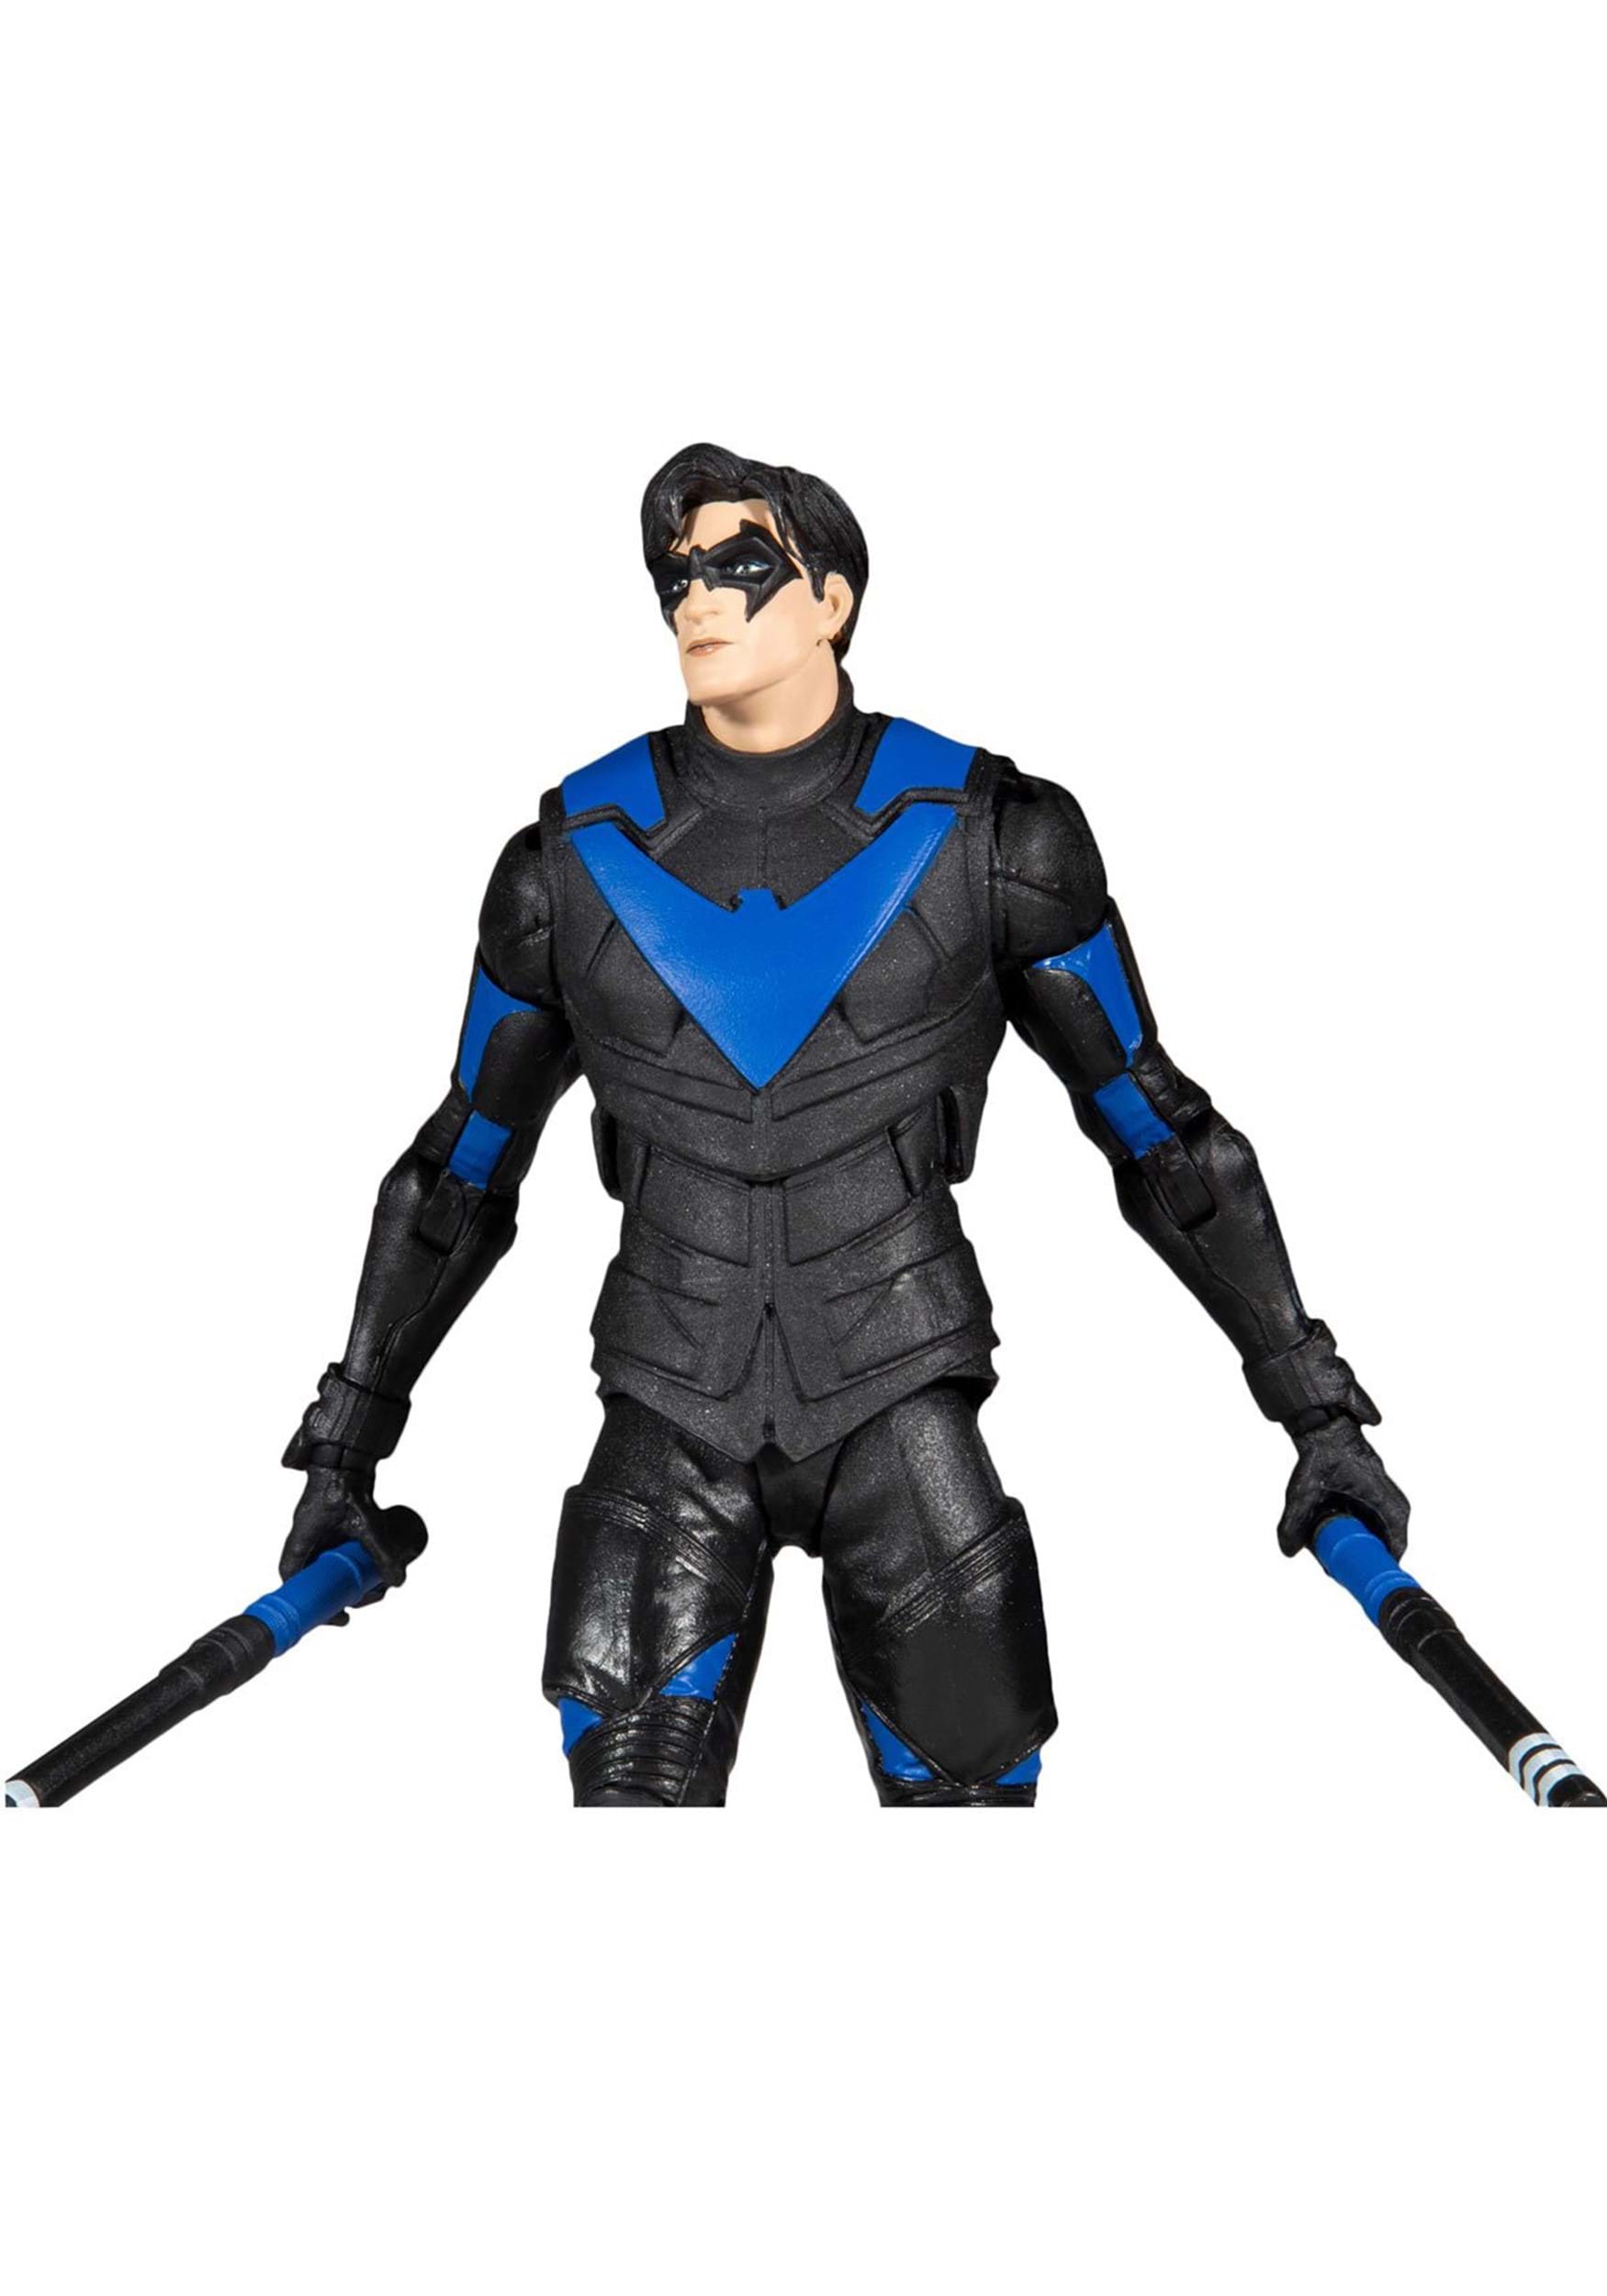 7-Inch Scale DC Gaming Injustice 2 Nightwing Action Figure